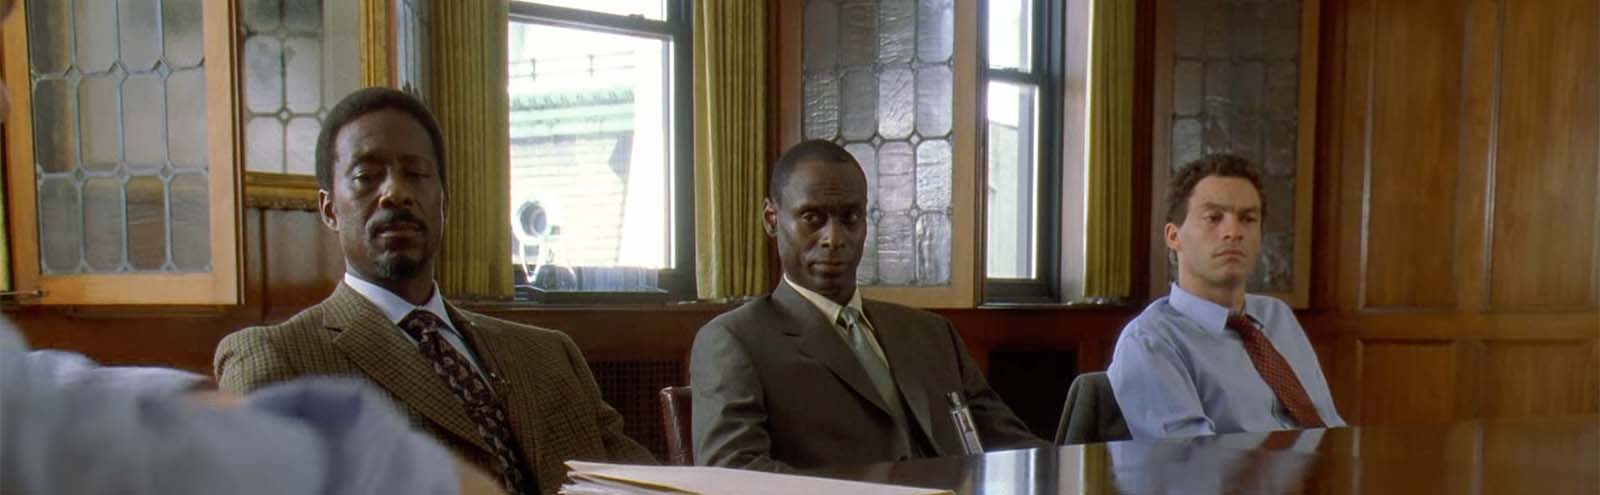 Daniels, Lester, McNulty on The Wire